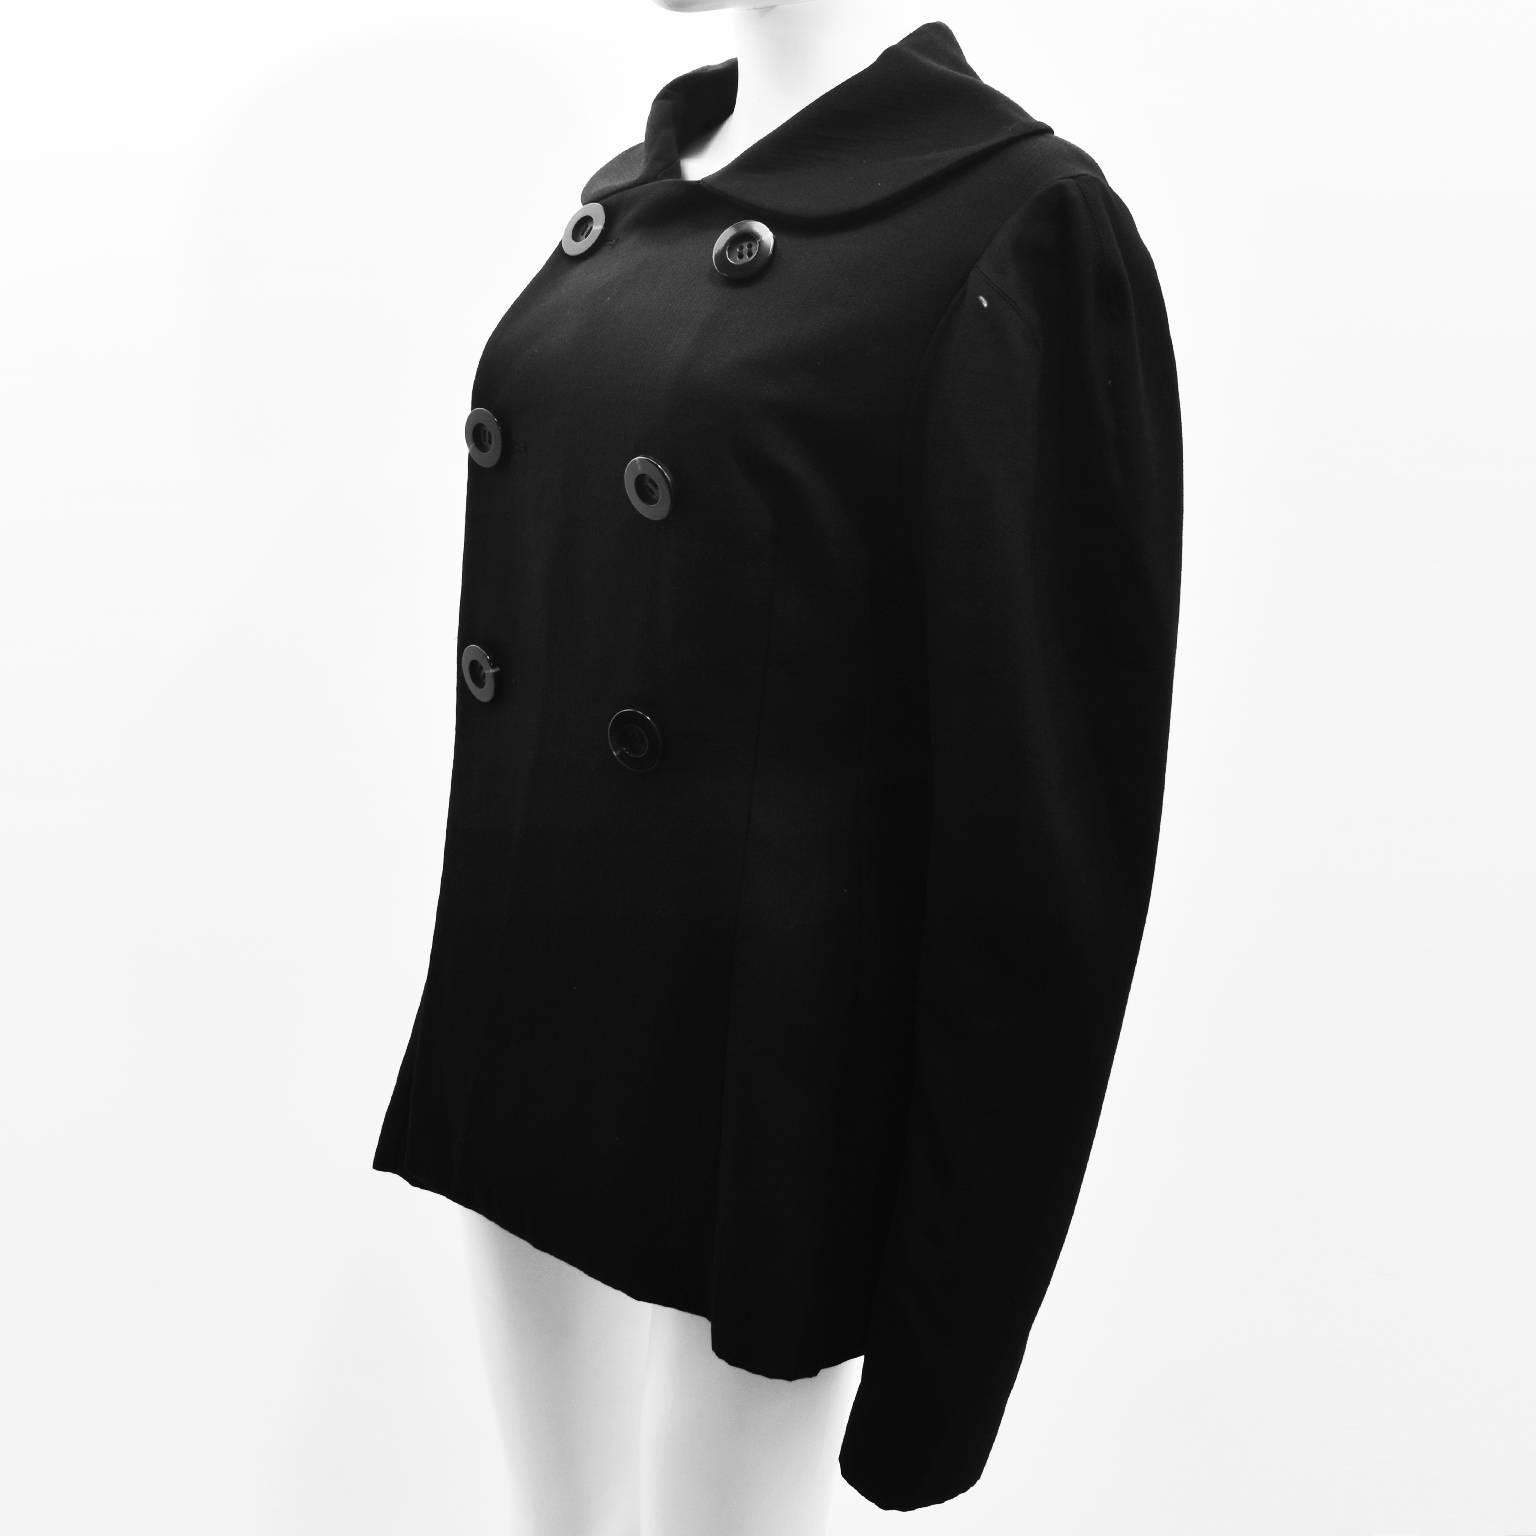 A black jacket by Yohji Yamamoto with interesting design details. The jacket is double breasted with a boxy shape and a large round collar. It also features large, oversized sleeves that puff slightly at the shoulder creating an unusual silhouette.